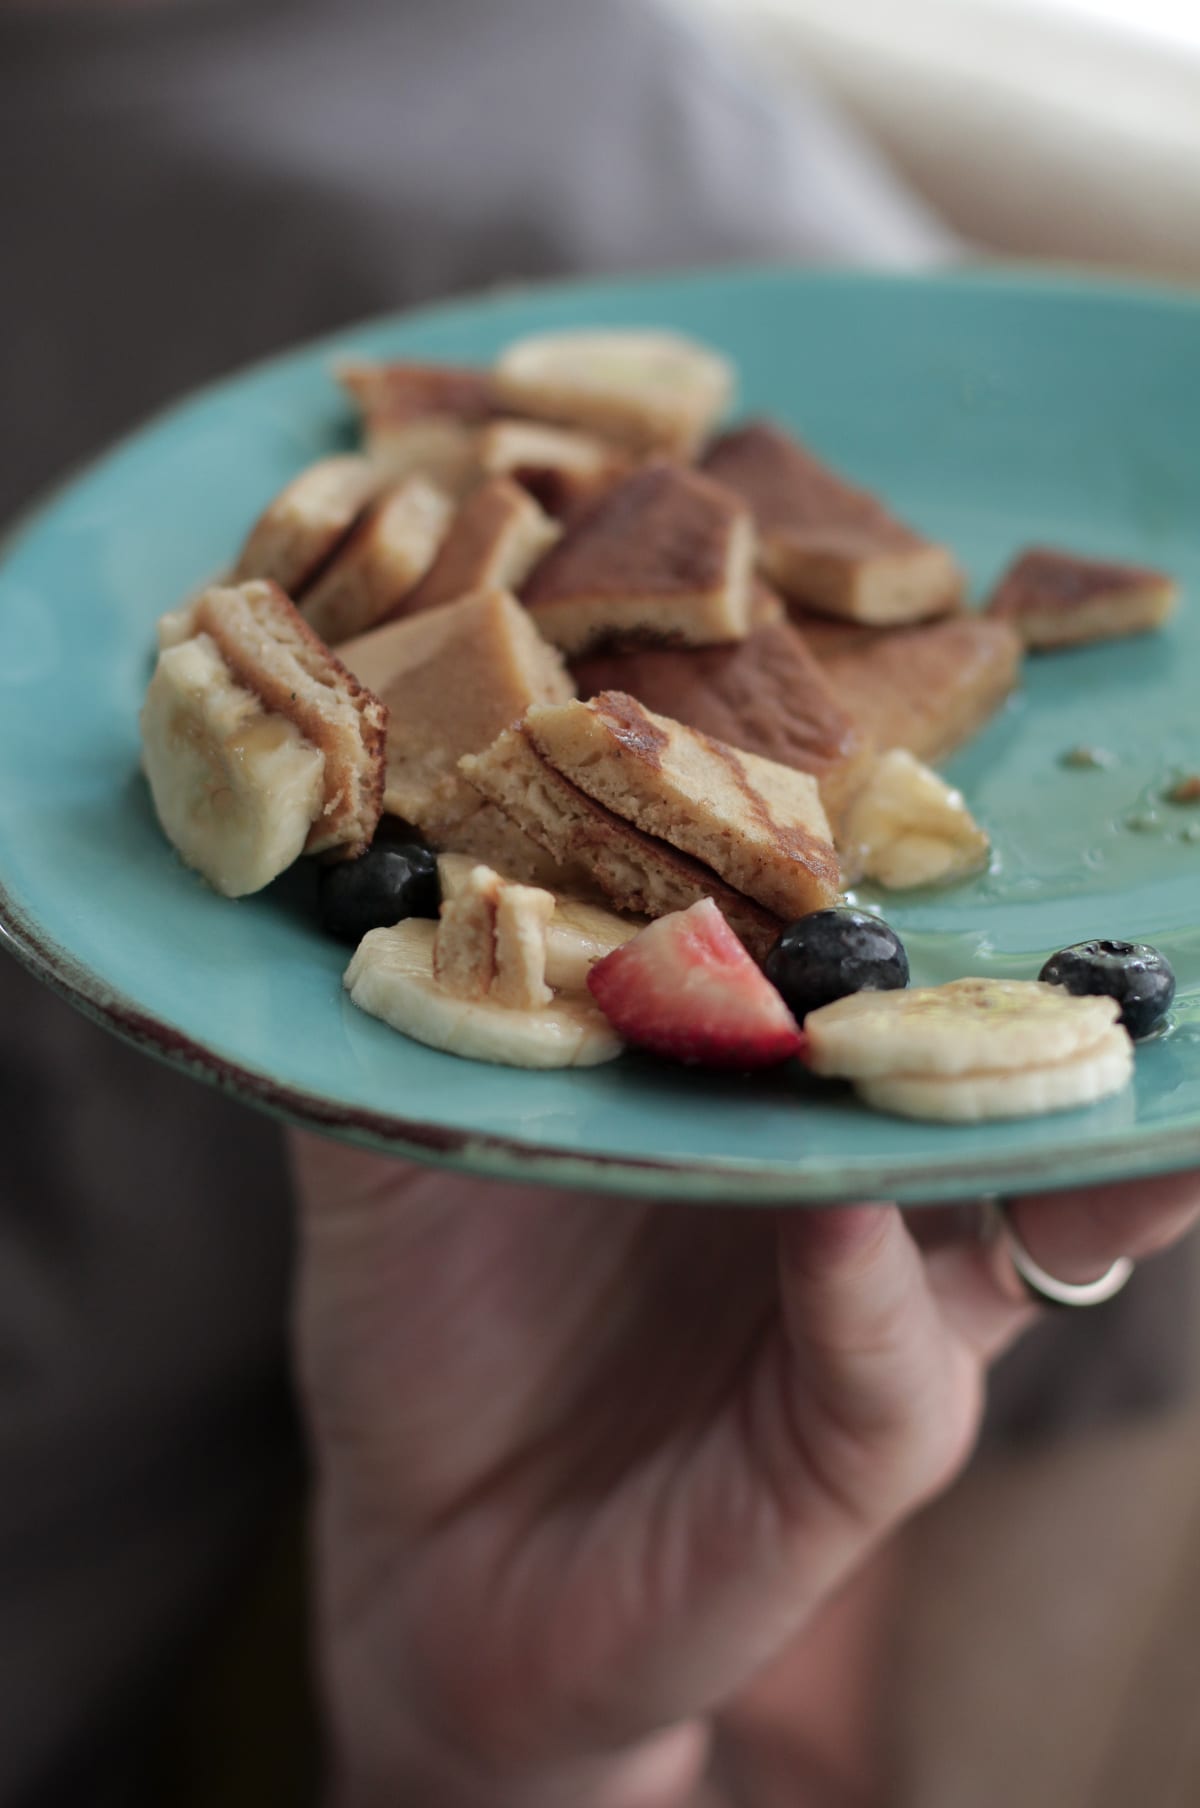 Freezer friendly whole grain banana pancakes in blender. These pancakes are not your average morning stack.